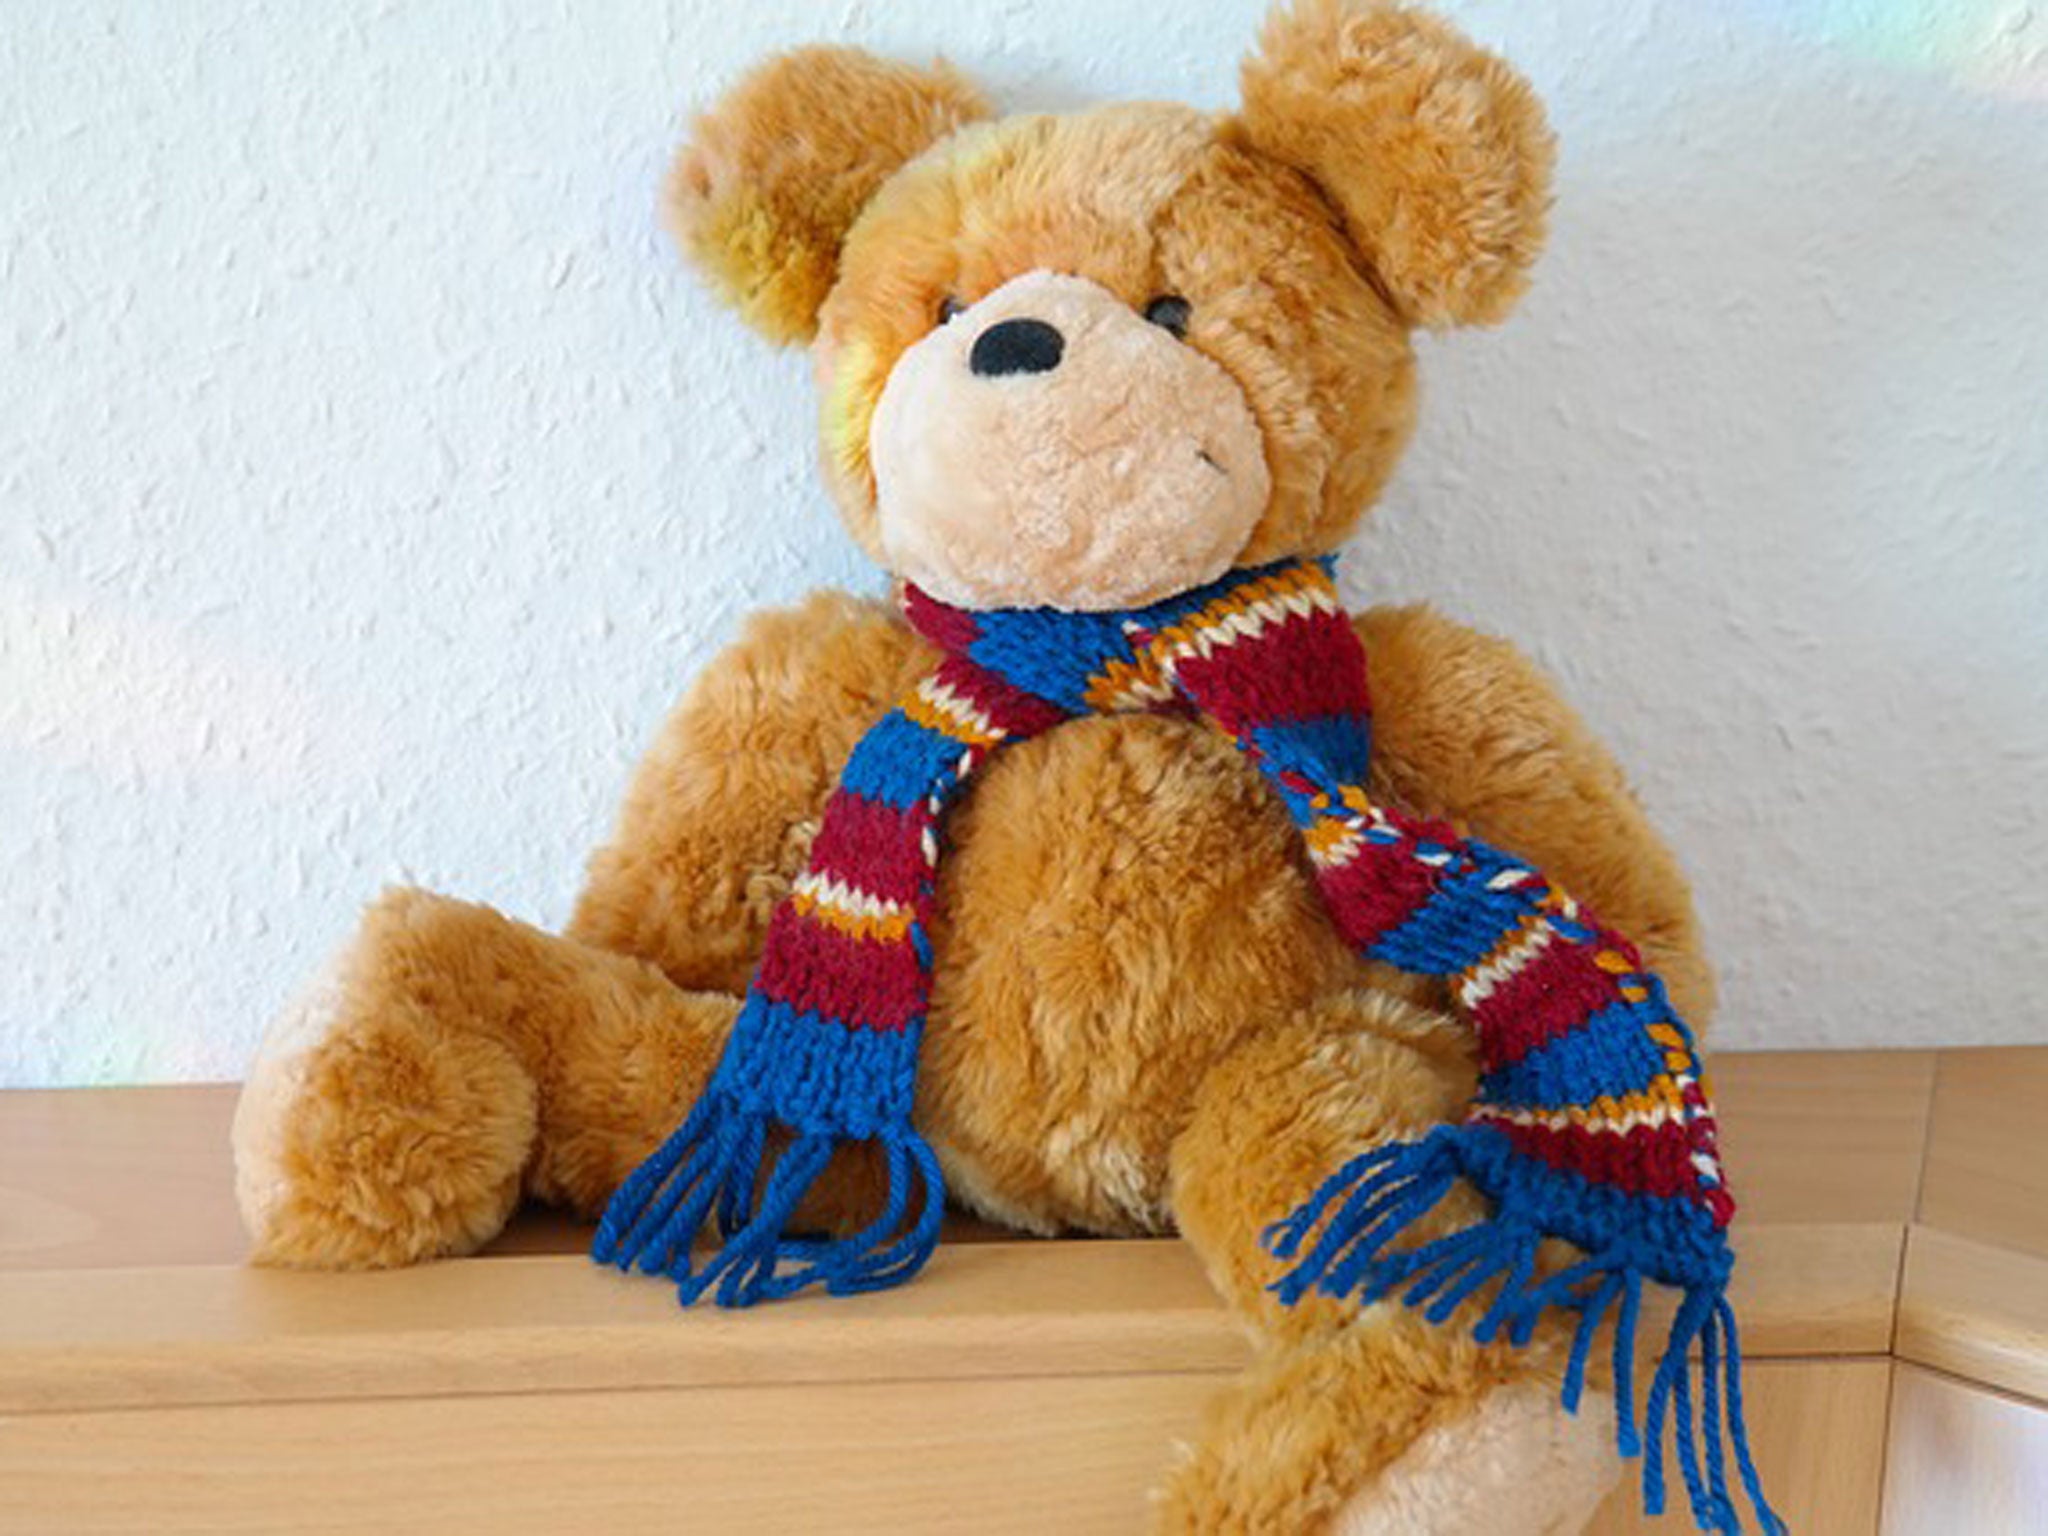 Parents feel pressured to do interesting things with their teddy guests